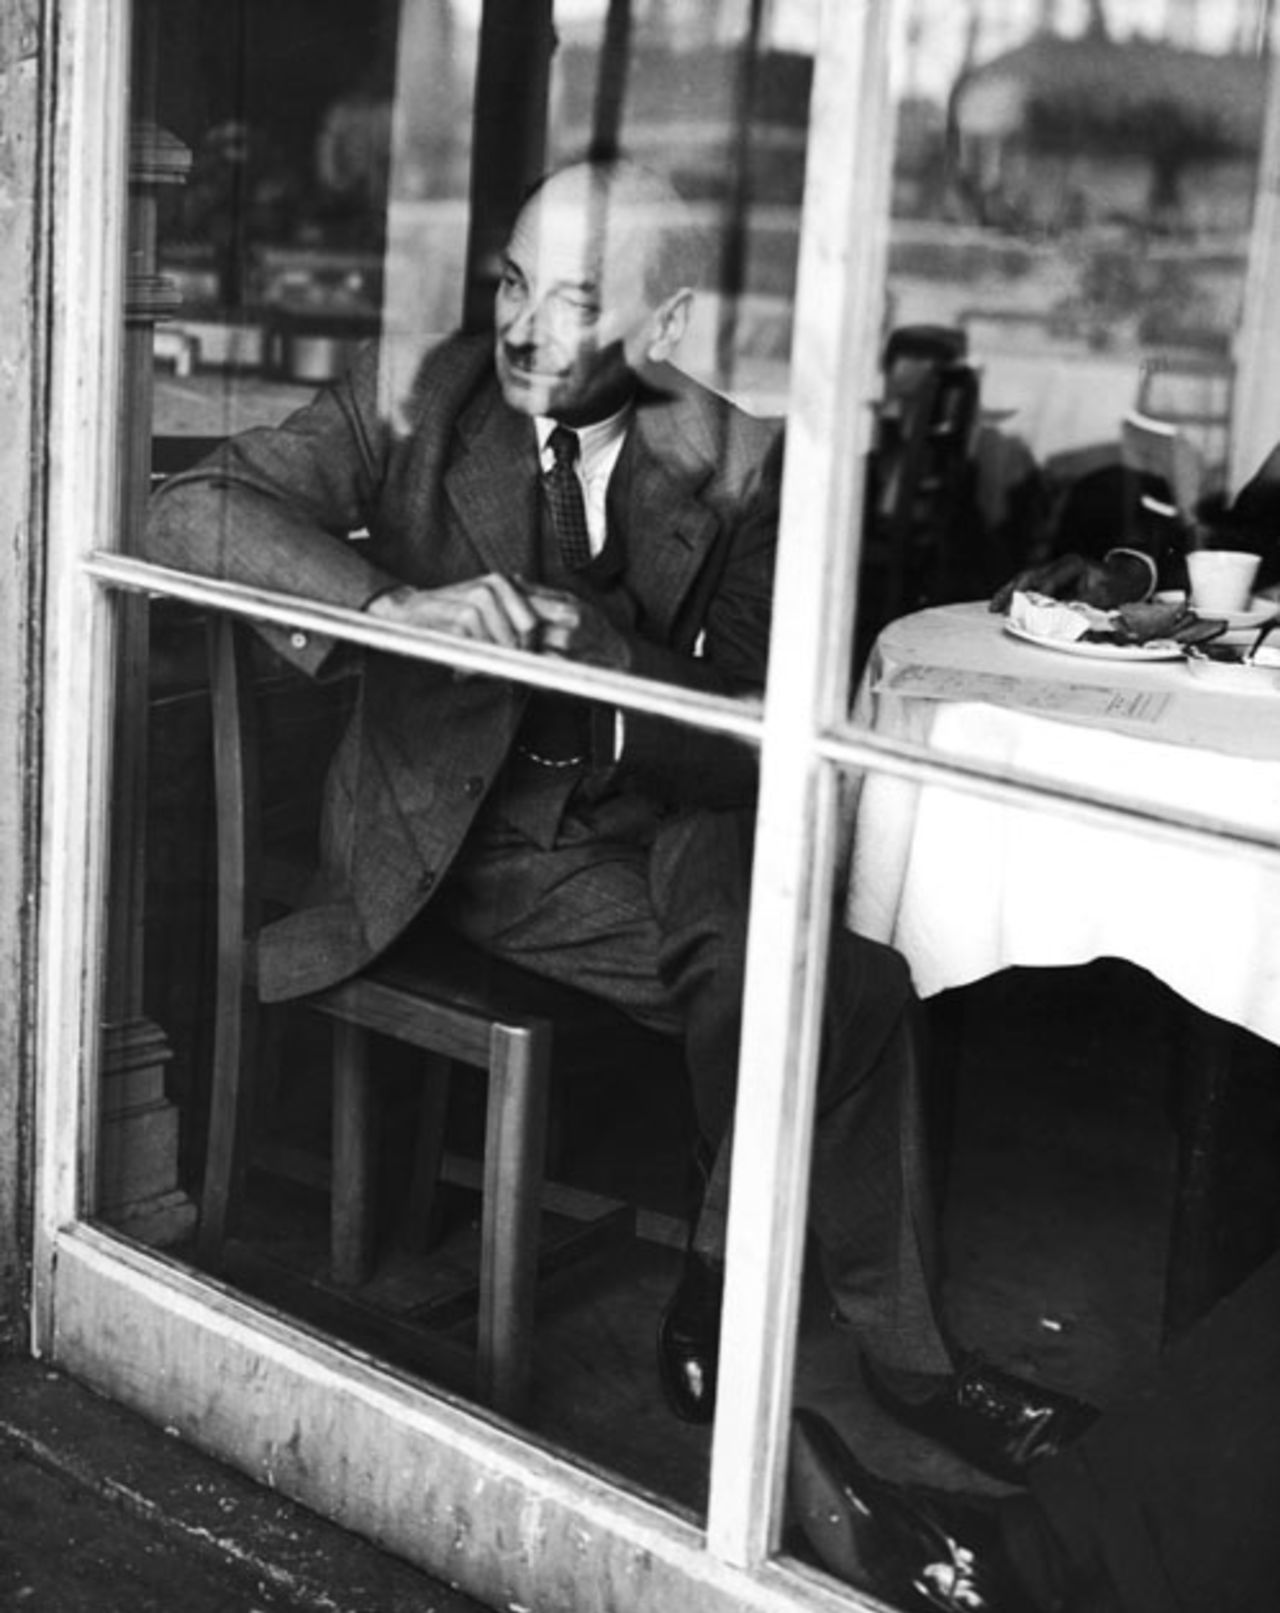 Clement Attlee, the prime minister of the United Kingdom, watches the game, England v India, 3rd Test, The Oval, 1st day, August 17, 1946 